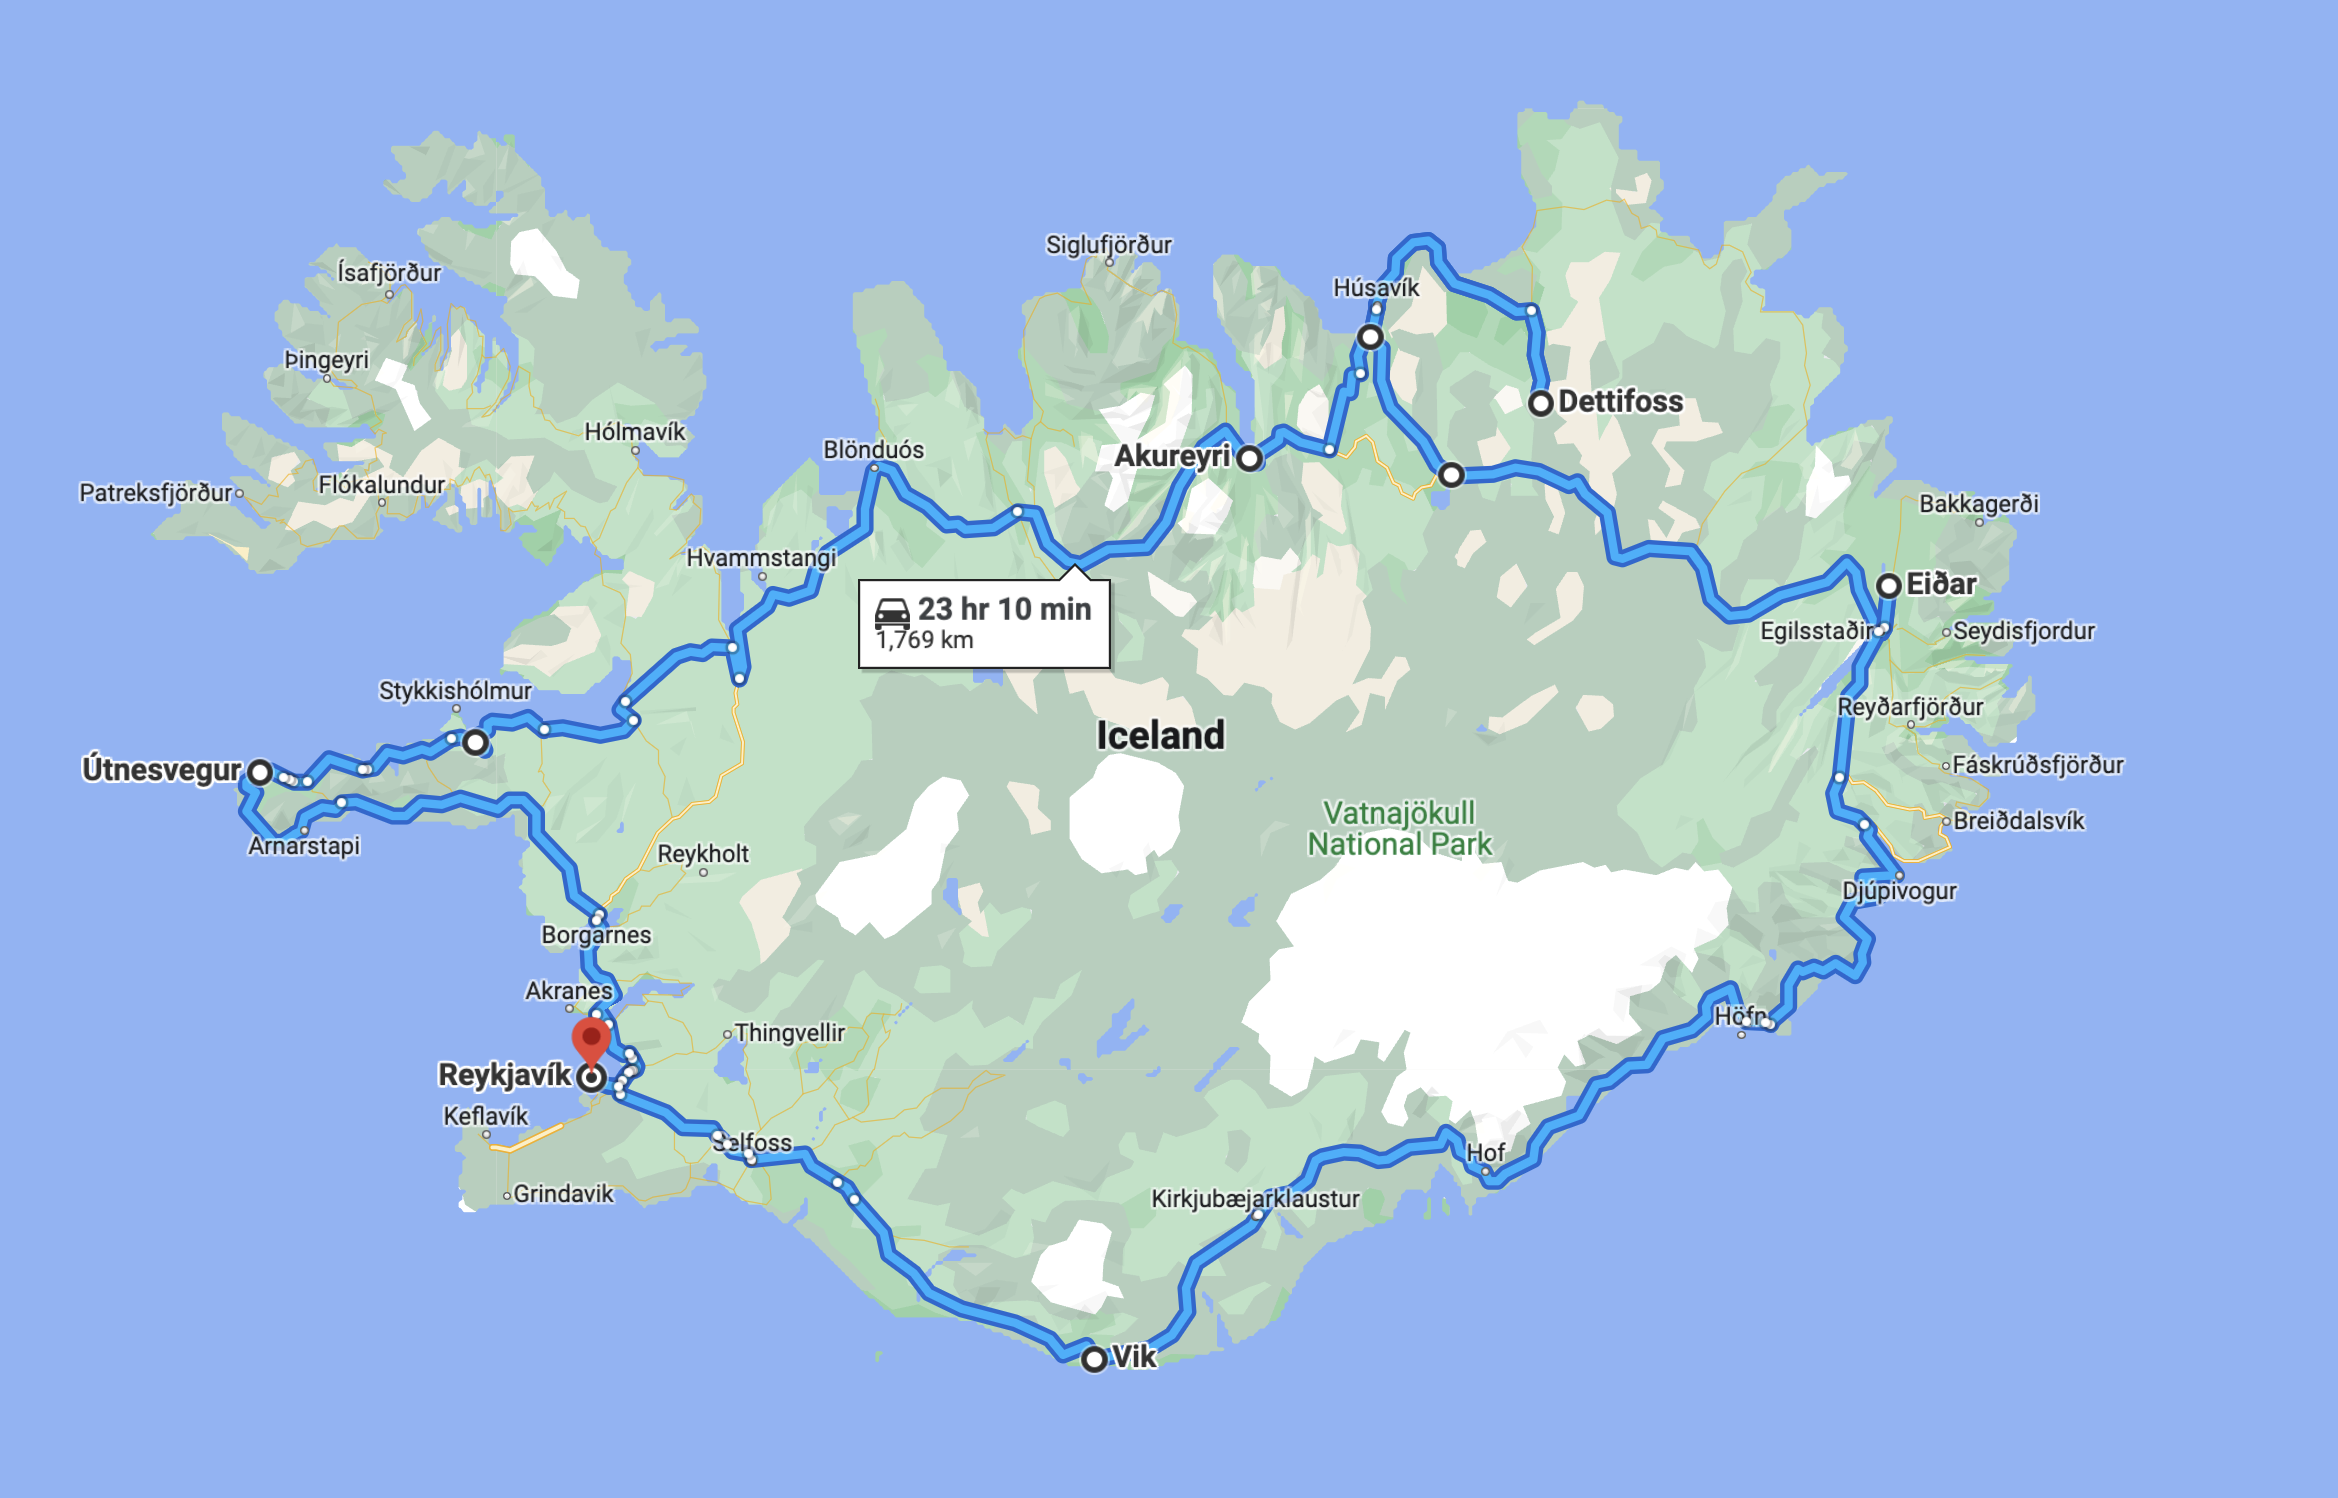 9 Great Hikes and Walks Along Iceland's Ring Road - The Big Outside